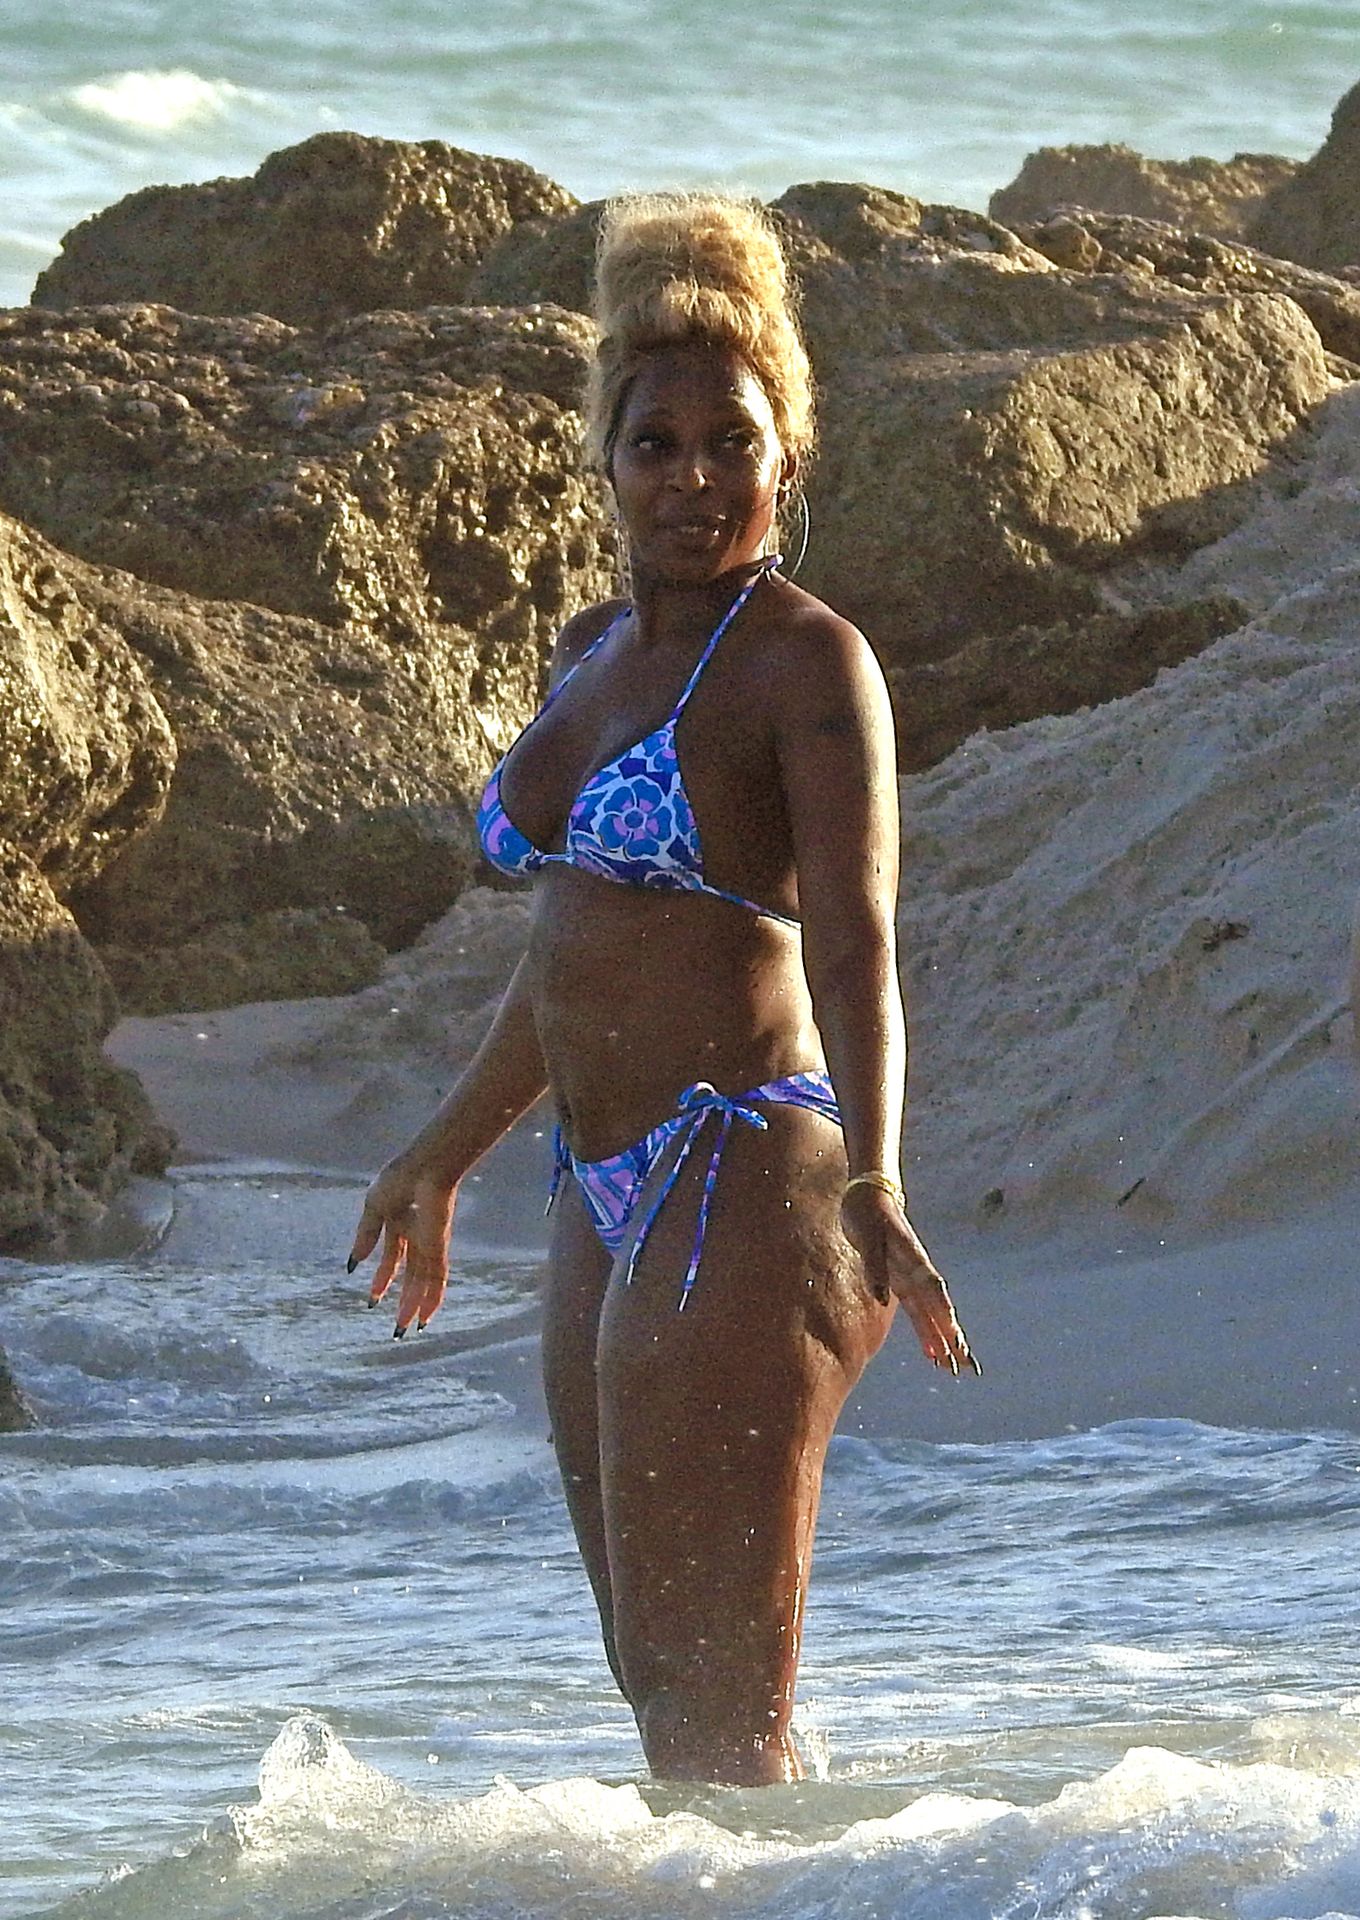 Mary j. blige nude